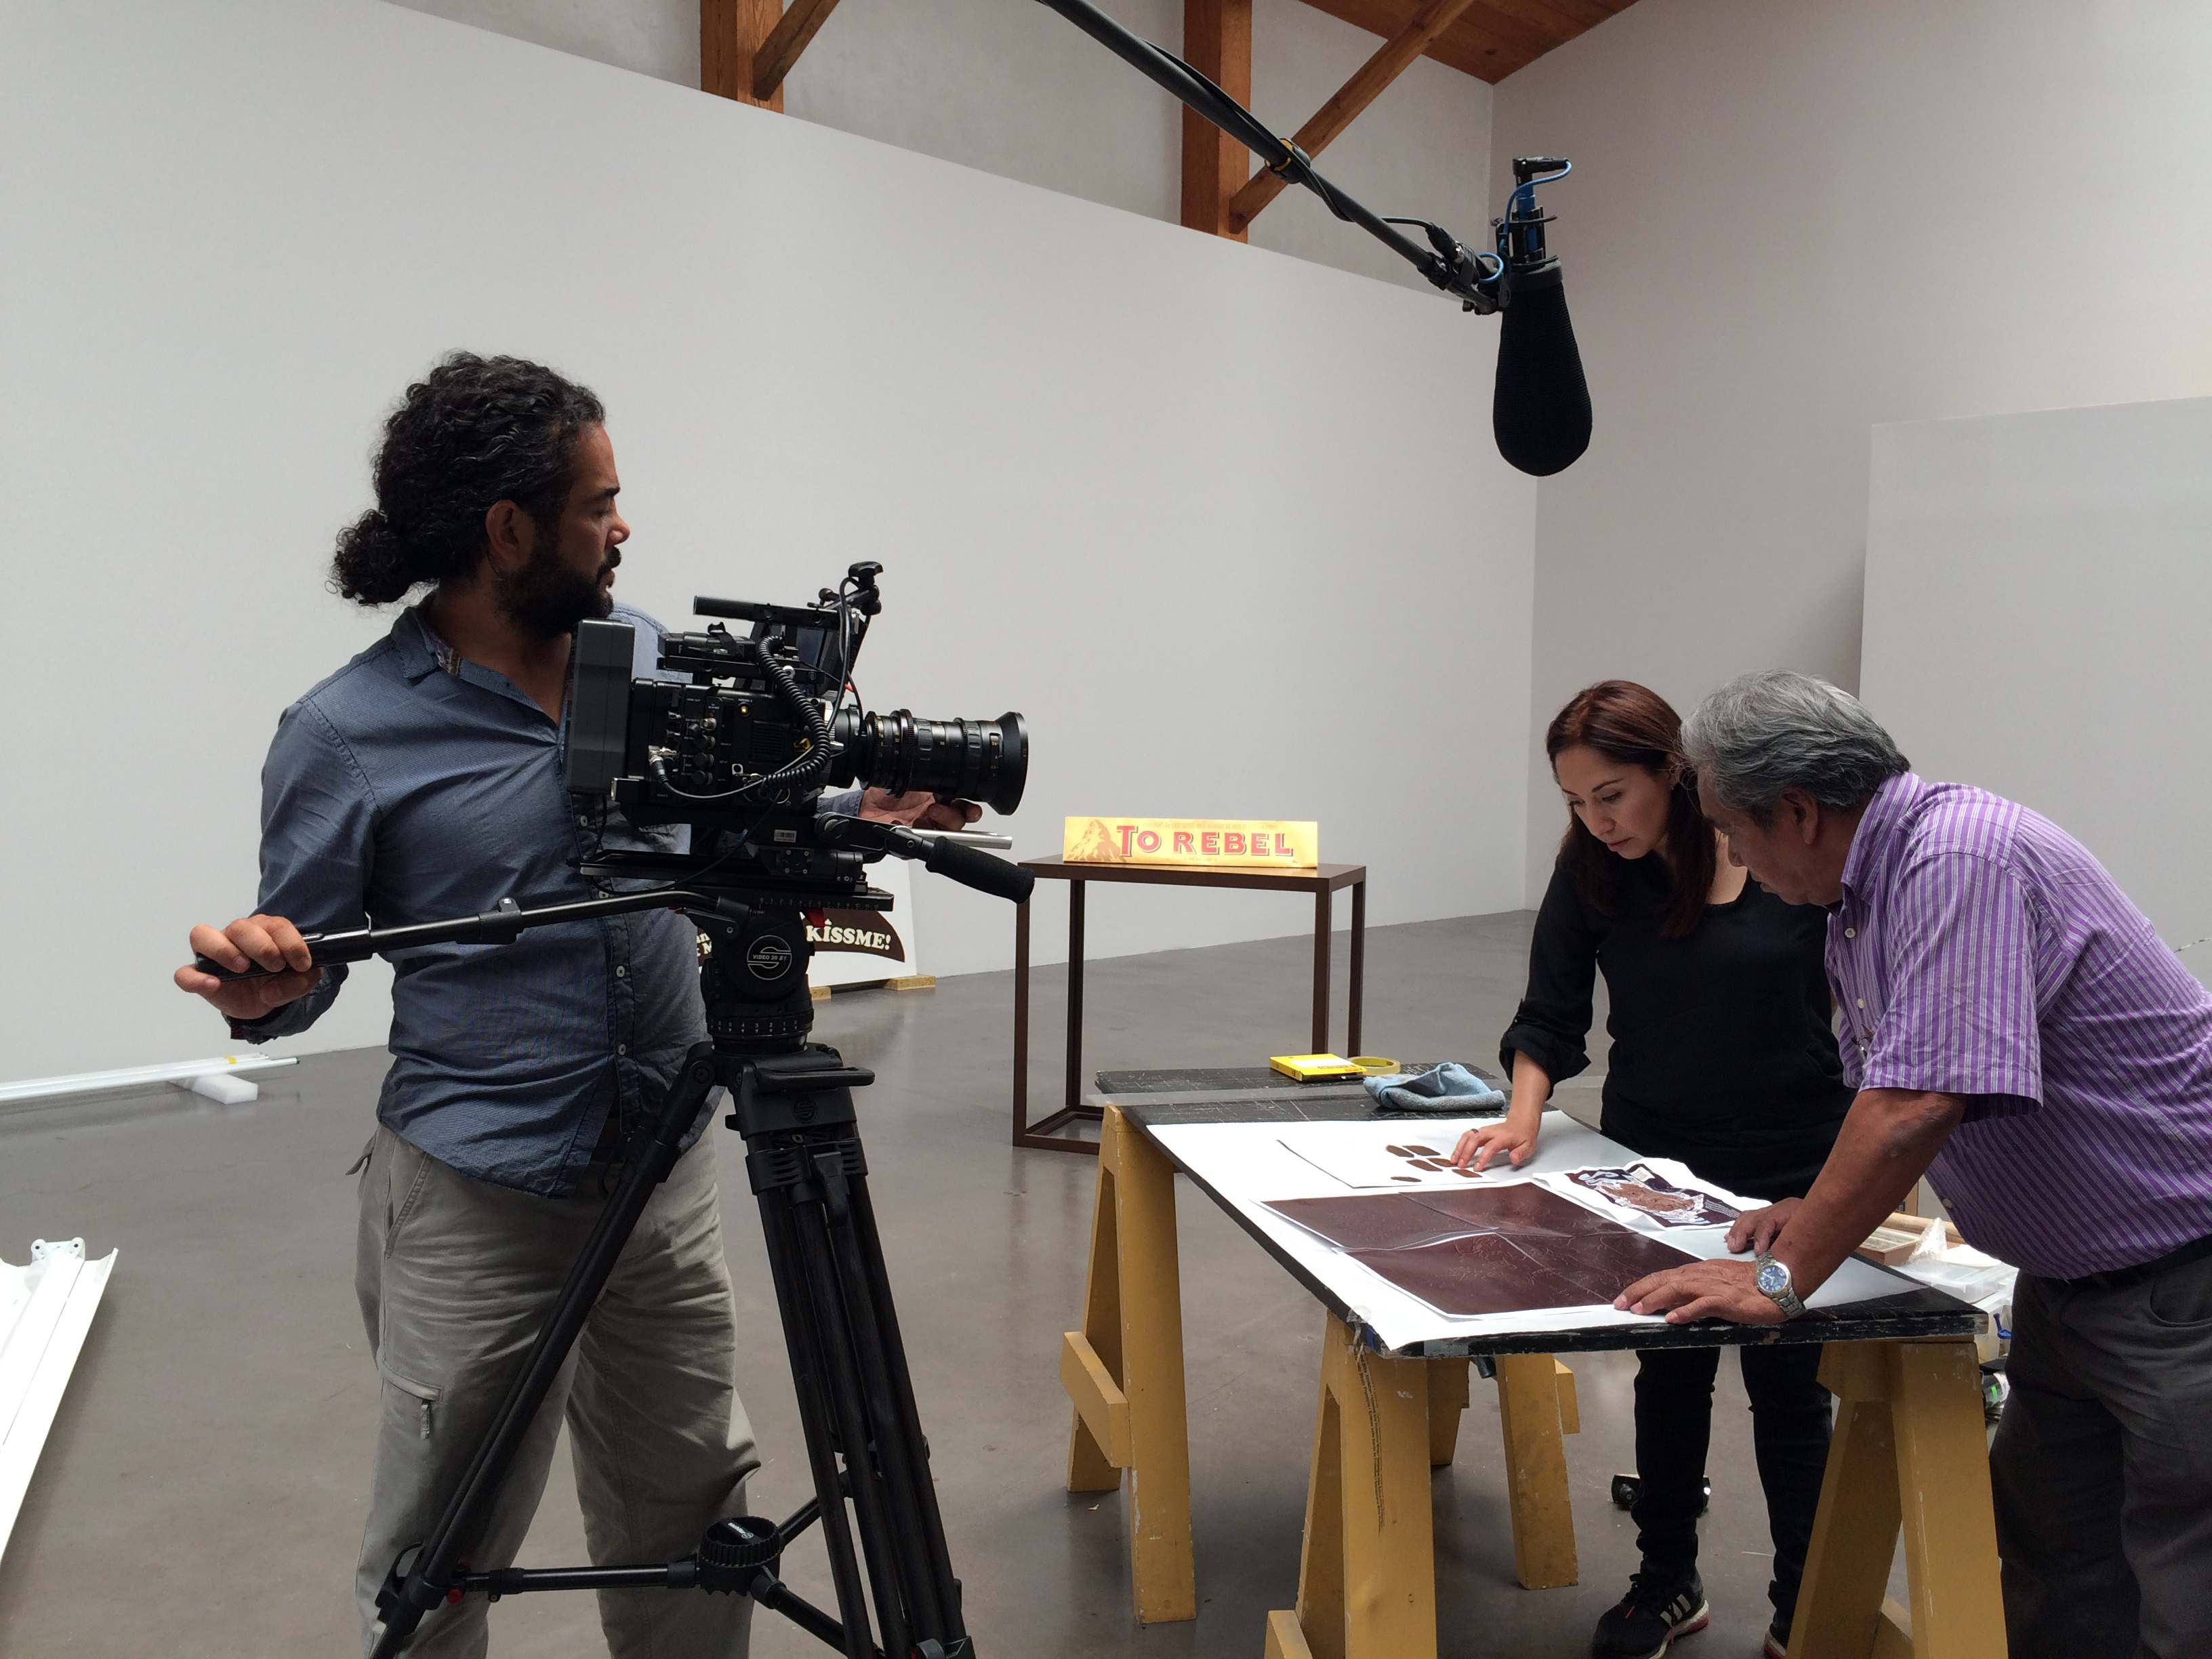 ART21 filming Minerva Cuevas installing her work in the exhibition Under the Same Sun: Art from Latin America Today at Museo Jumex in Mexico City. Behind the scenes of ART21’s series Art in the Twenty-First Century, Season 8, 2016. Photo: Ian Forster. © ART21, Inc. 2016.